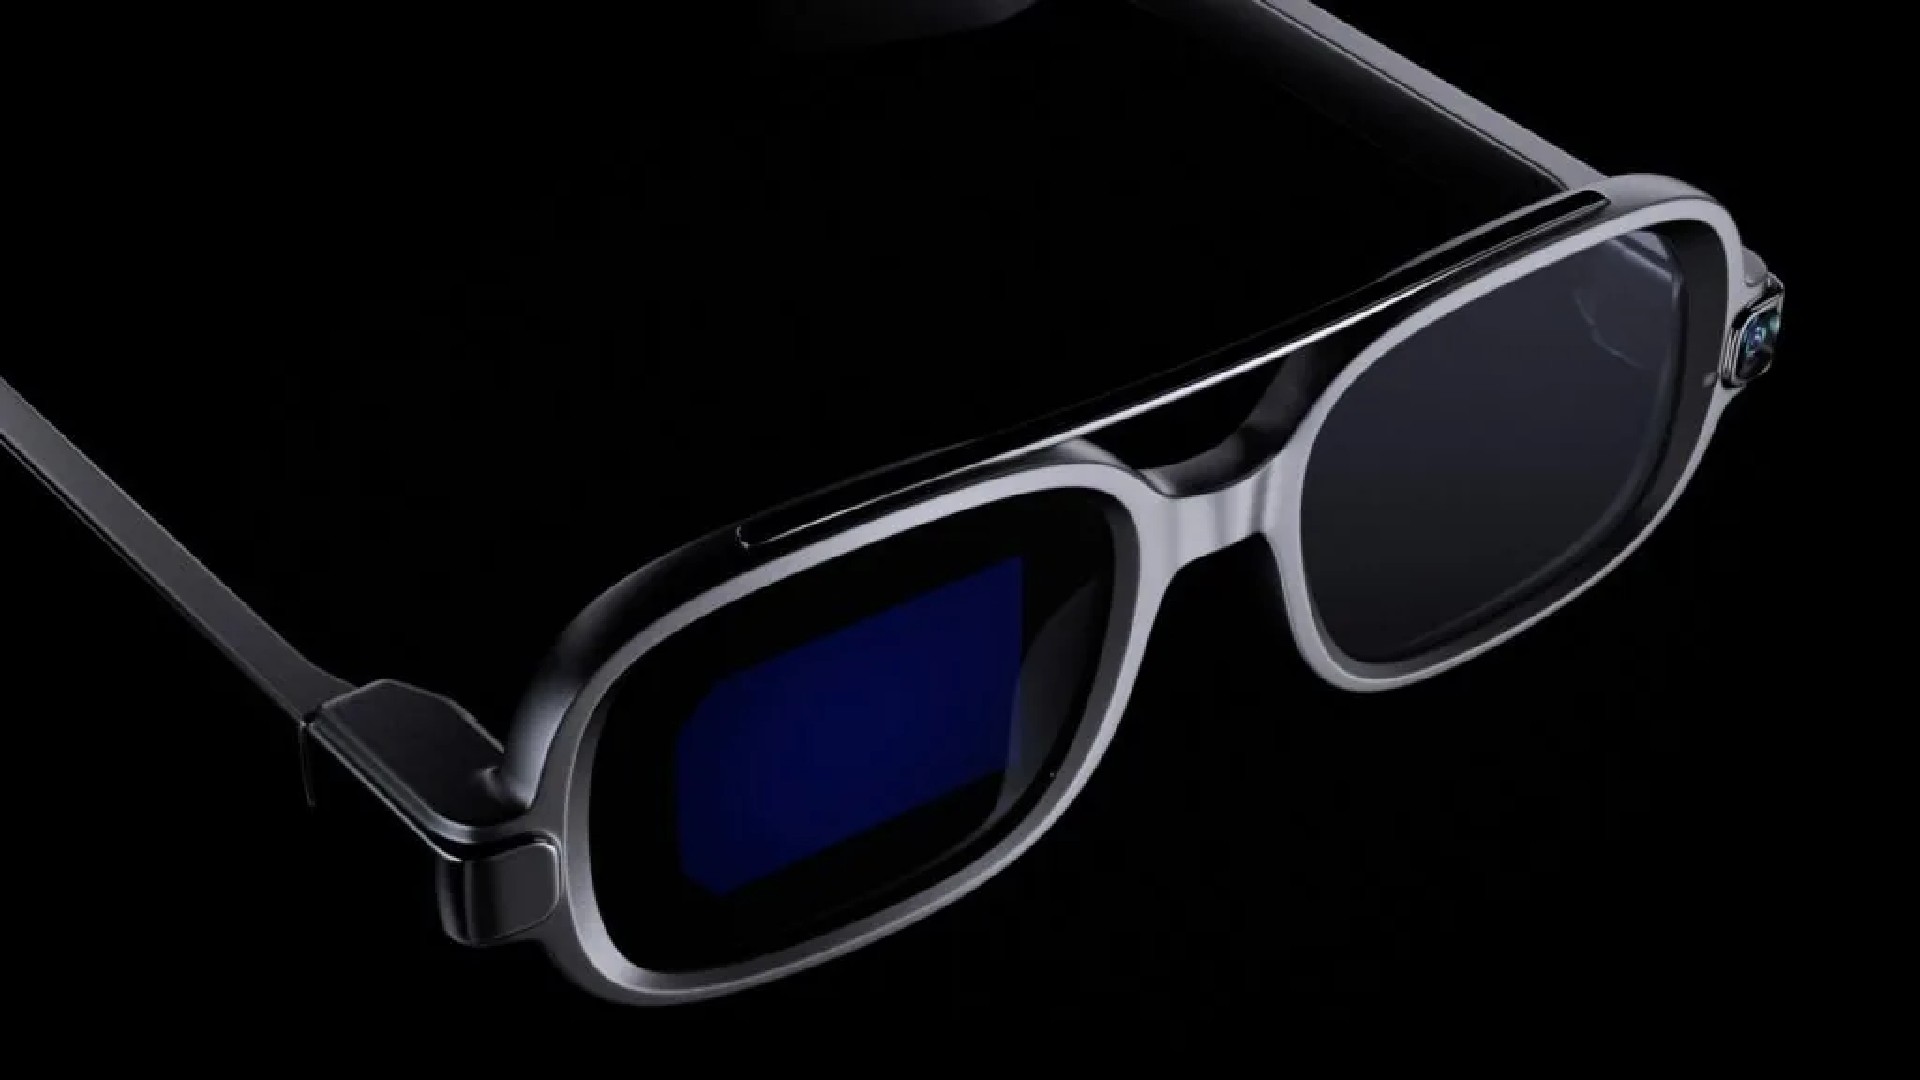 Xiaomi’s Offers Smart Glasses Too, With A Built-In Display